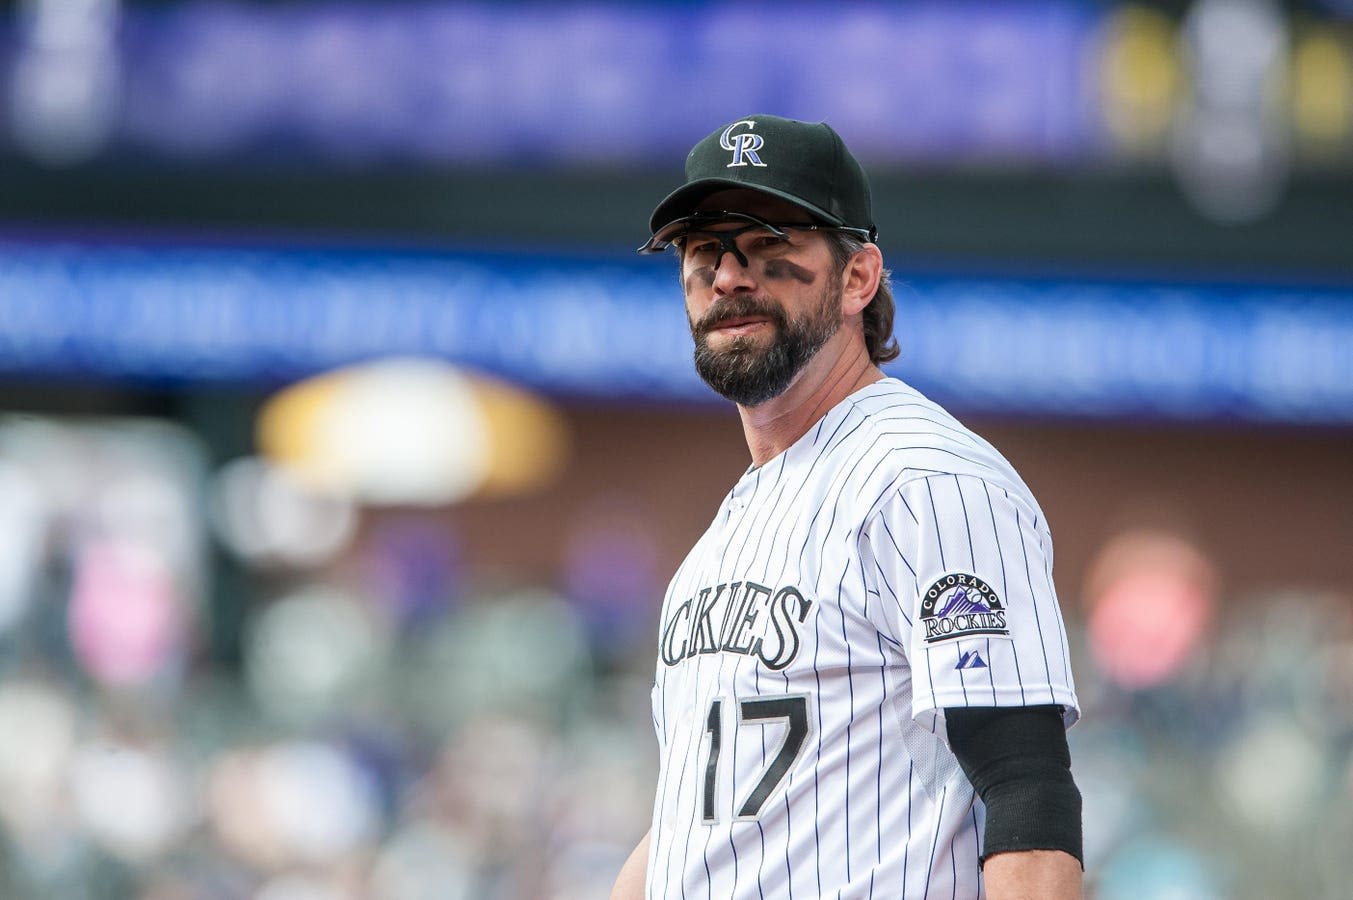 Todd Helton A Reminder Of A Rare Air The Colorado Rockies Aim To Reach